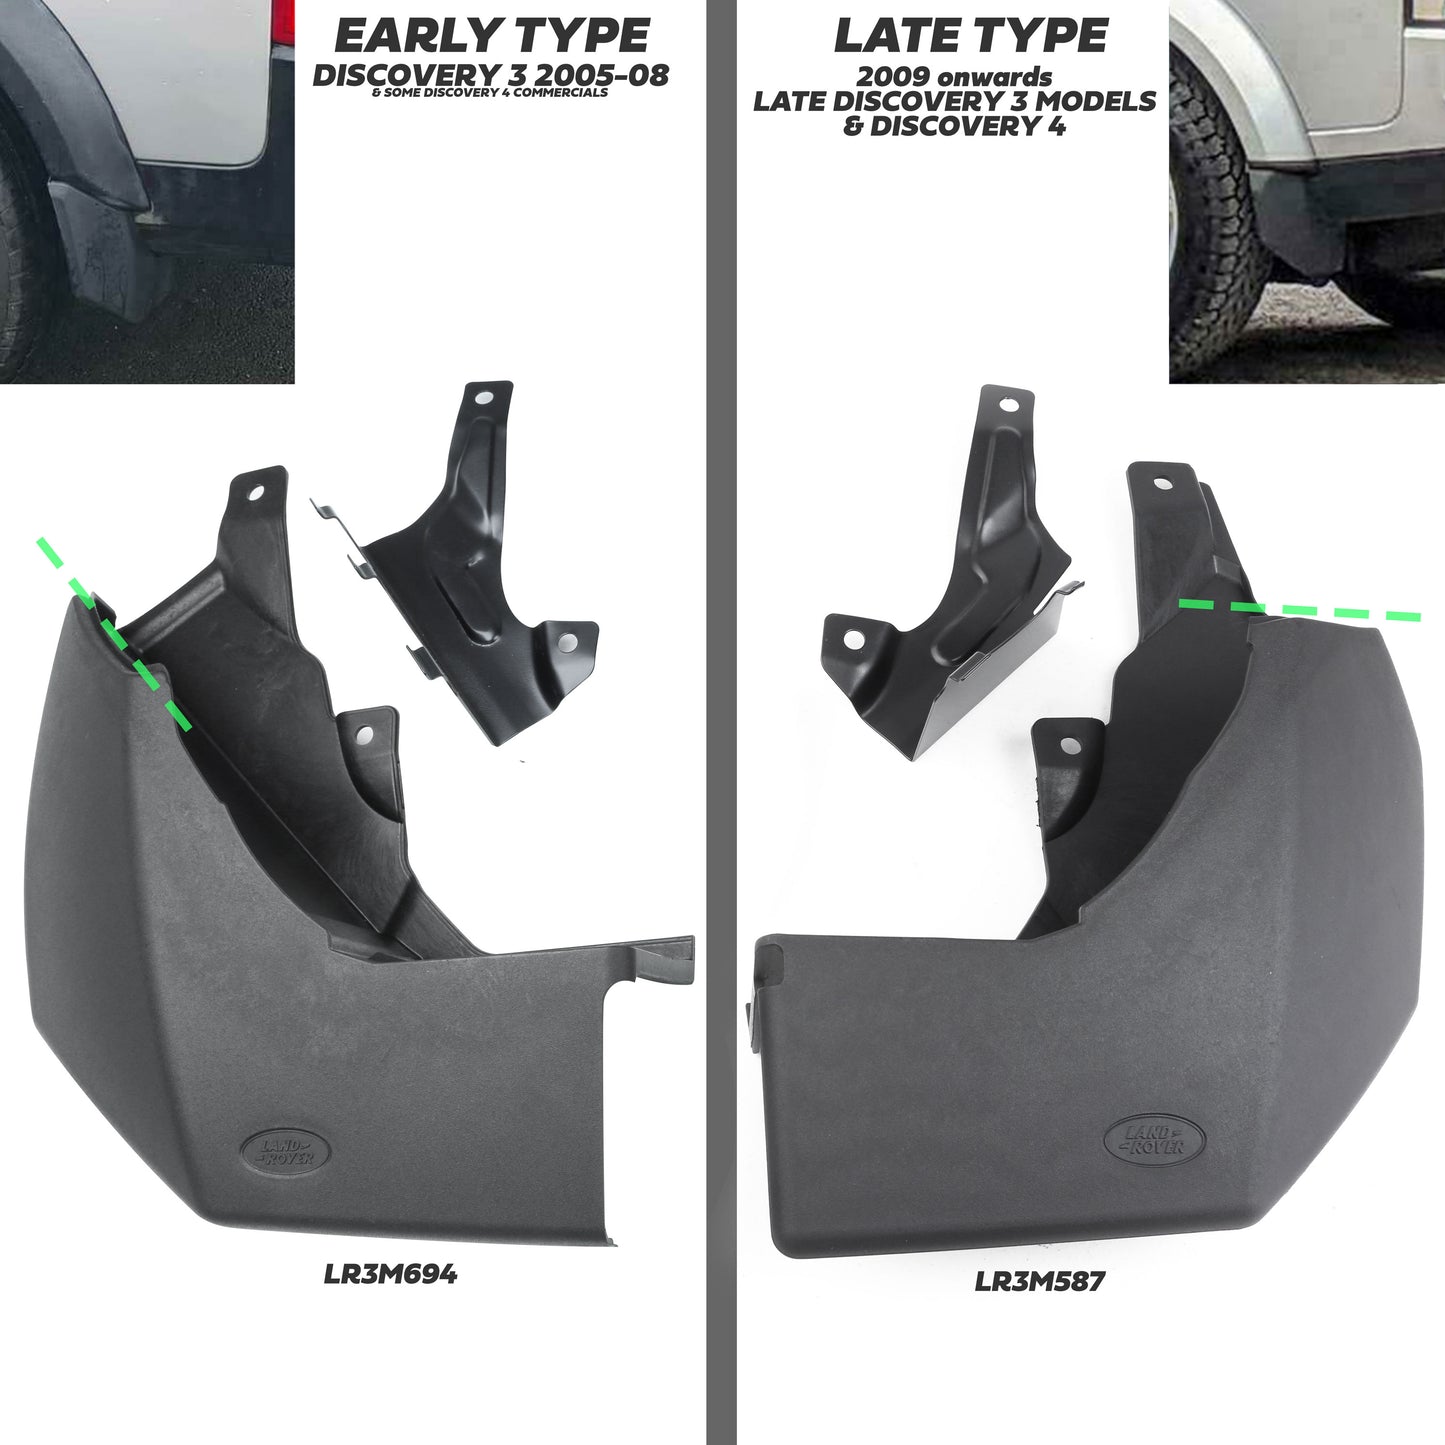 Genuine Mudflap Kit - Rear - for Land Rover Discovery 3(2009) & Discovery 4